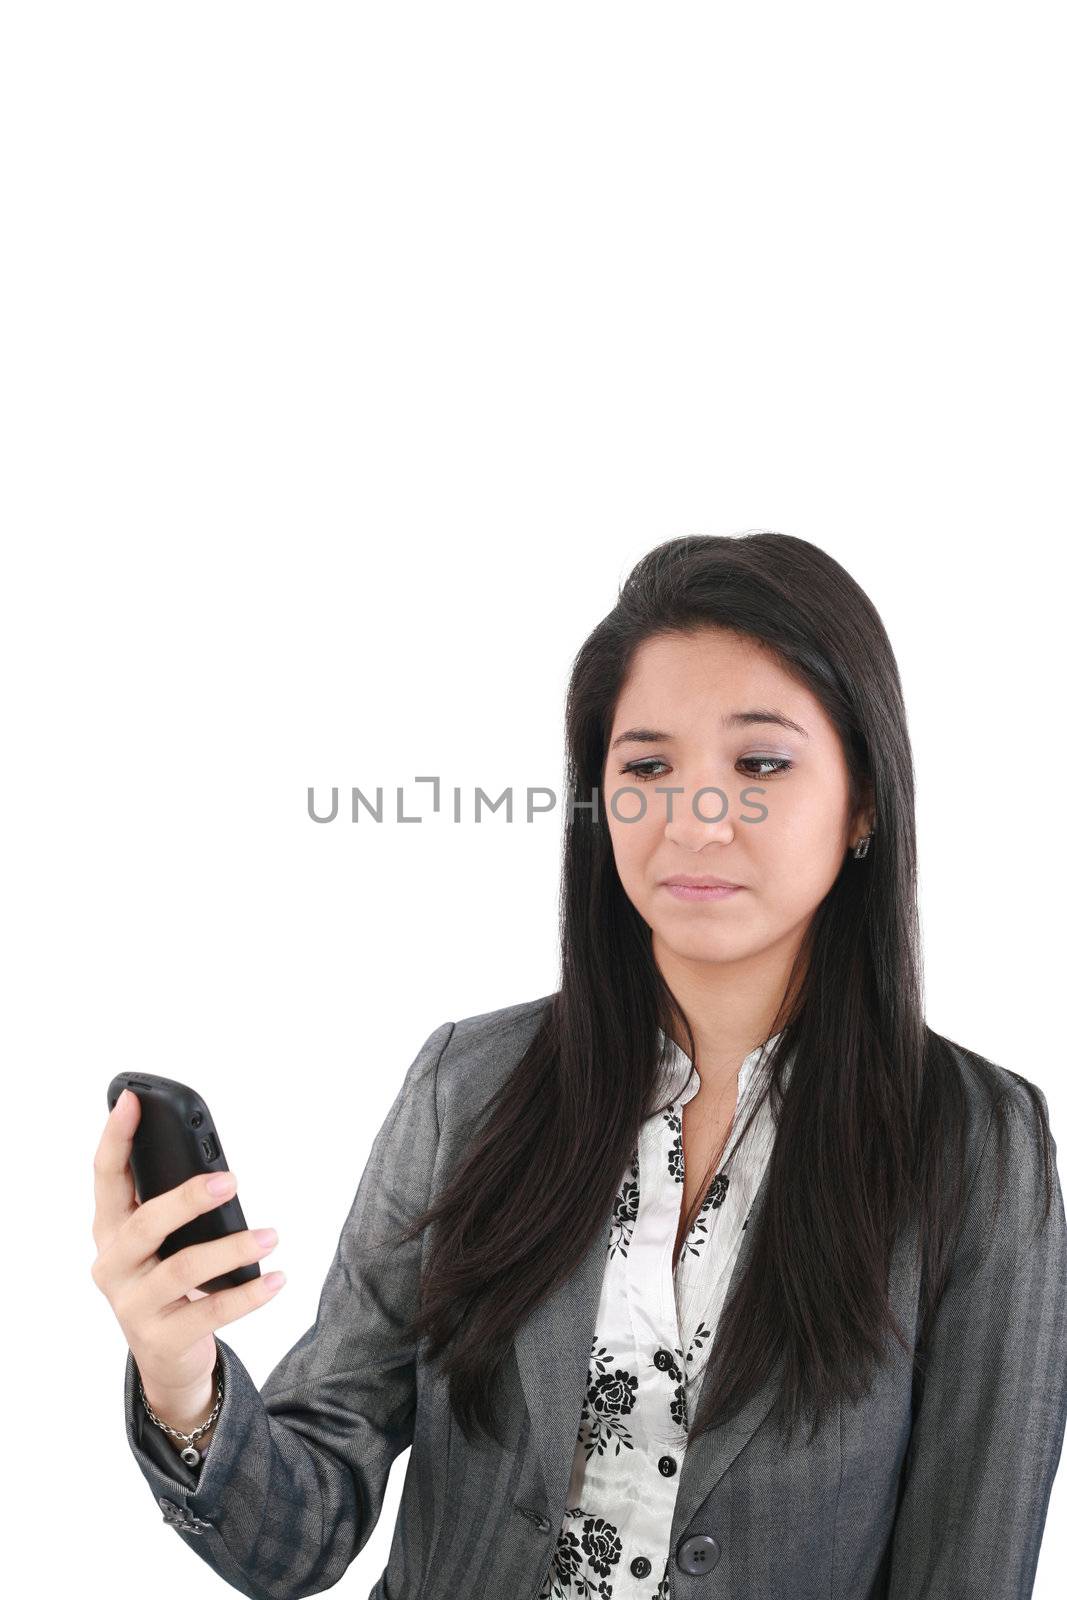 portrait of angry female looking at cellphone, isolated on white background